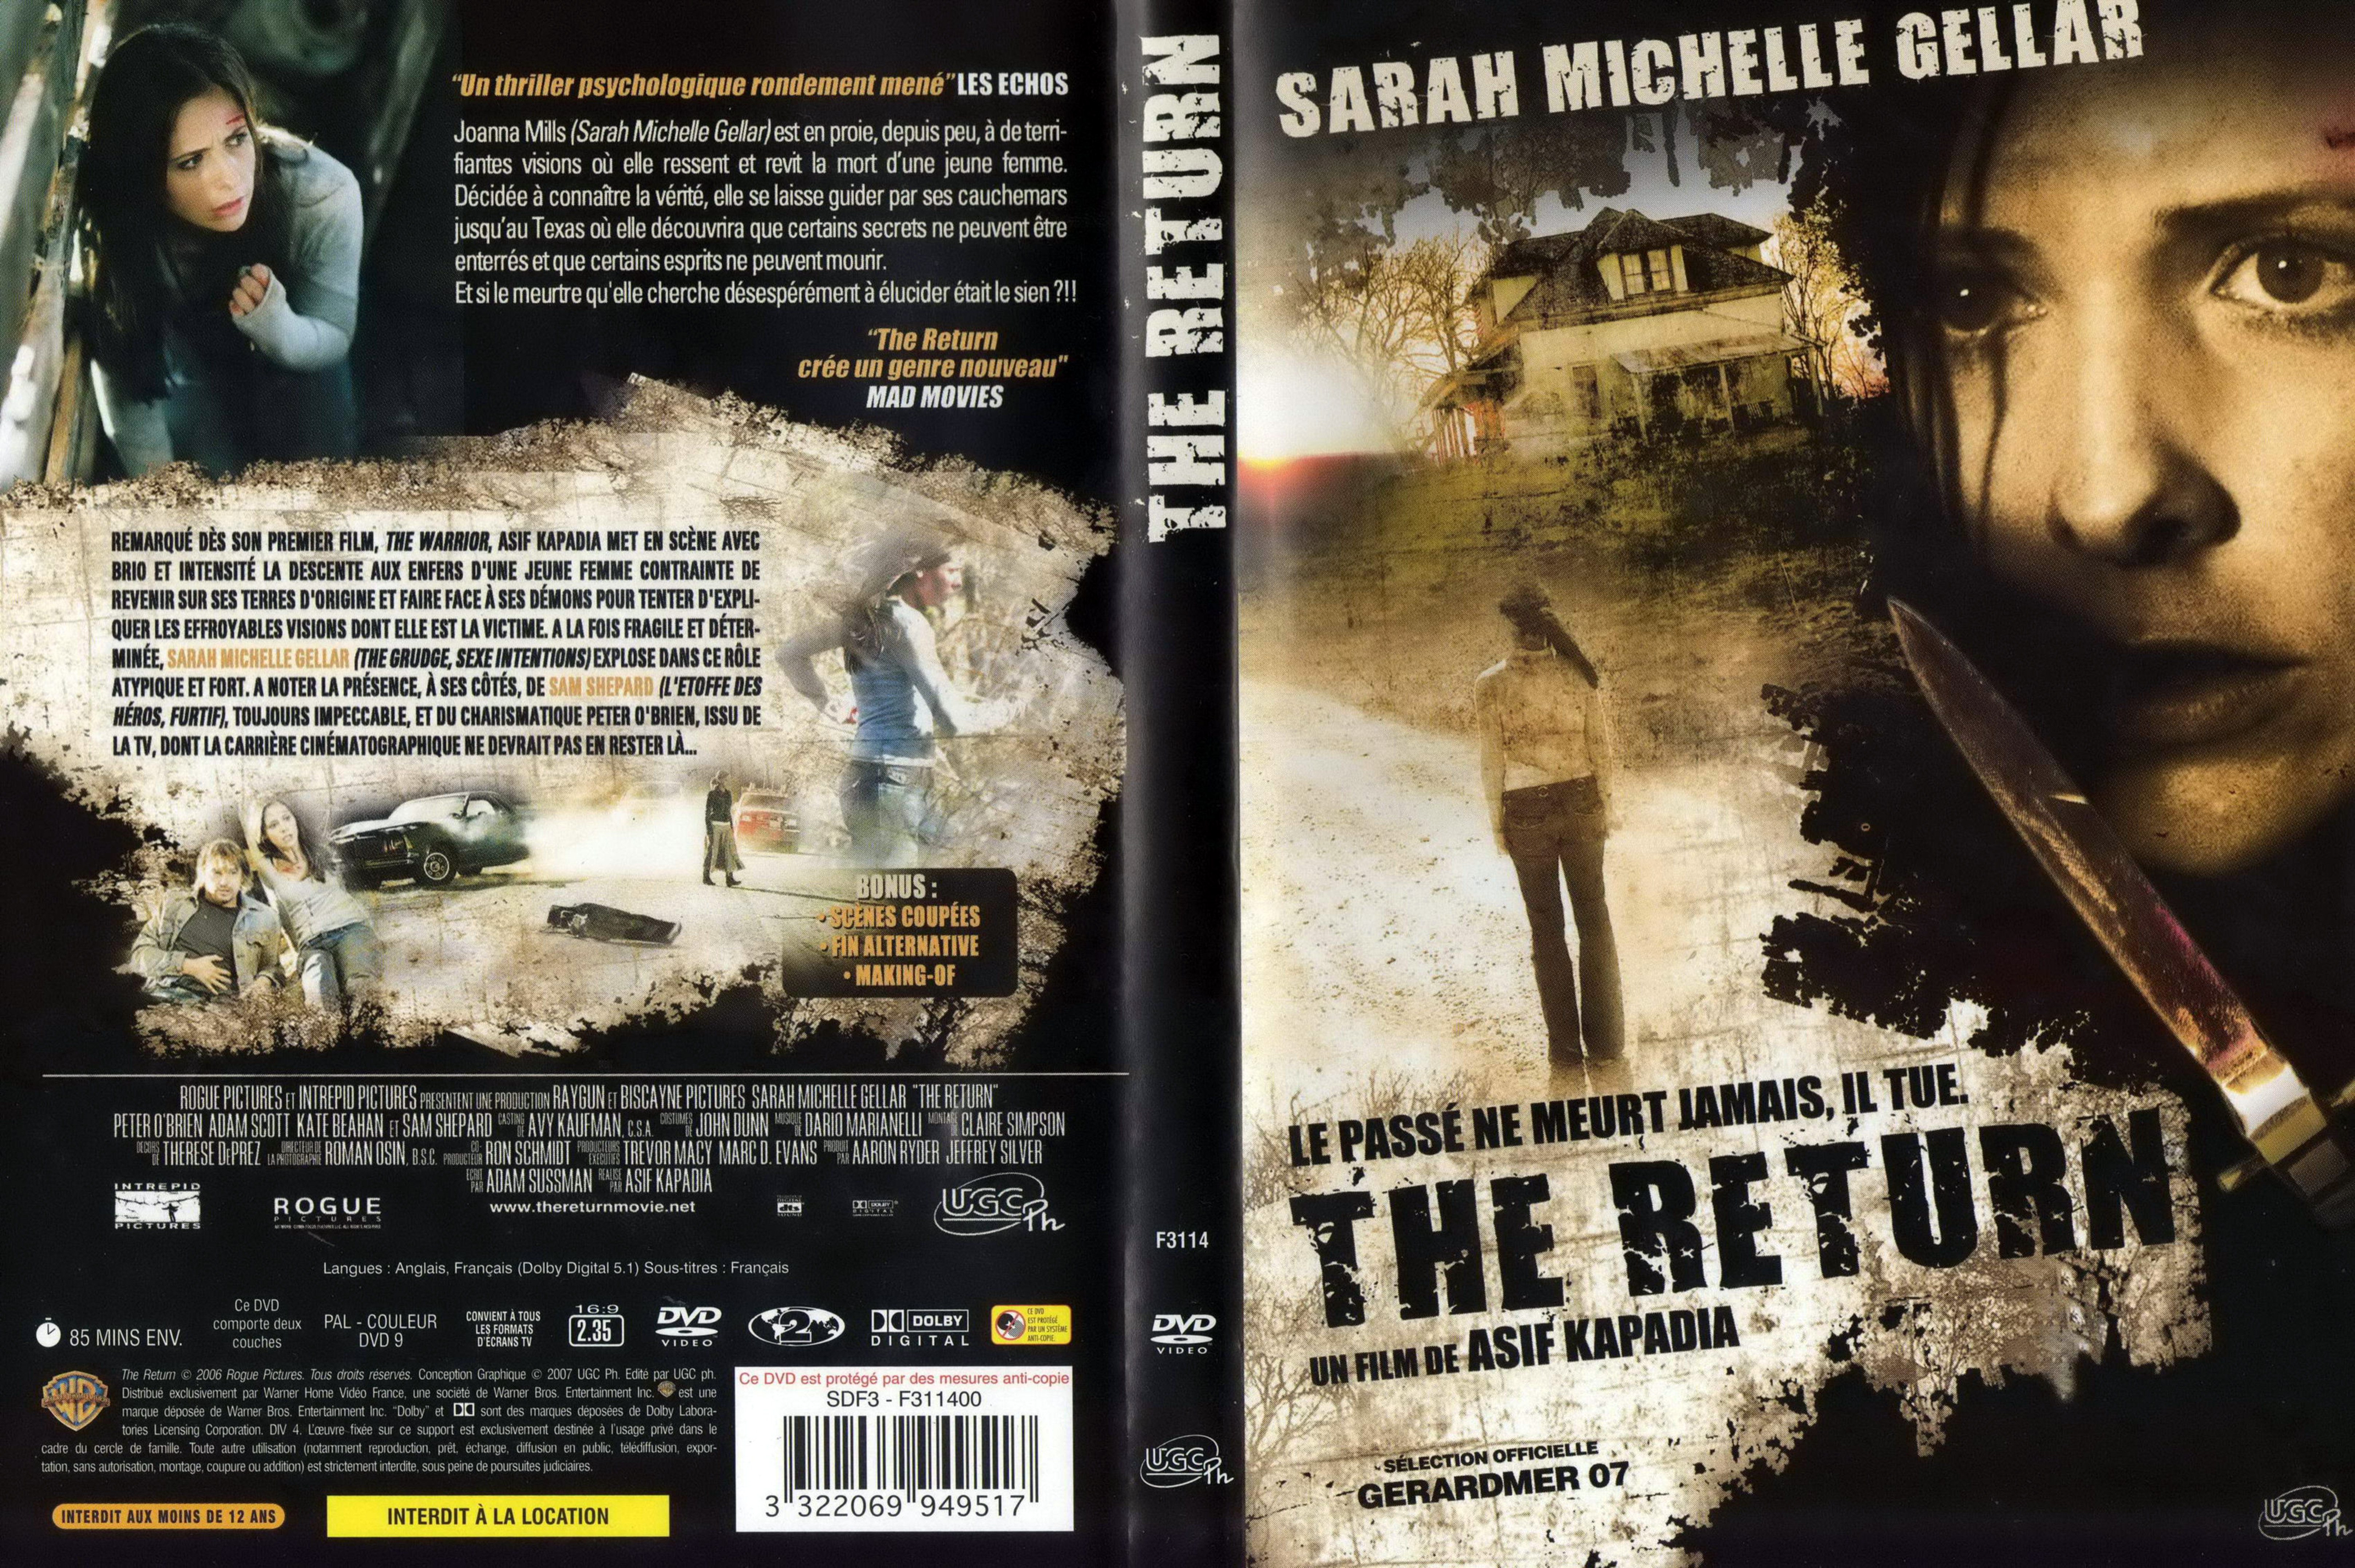 Jaquette DVD The return